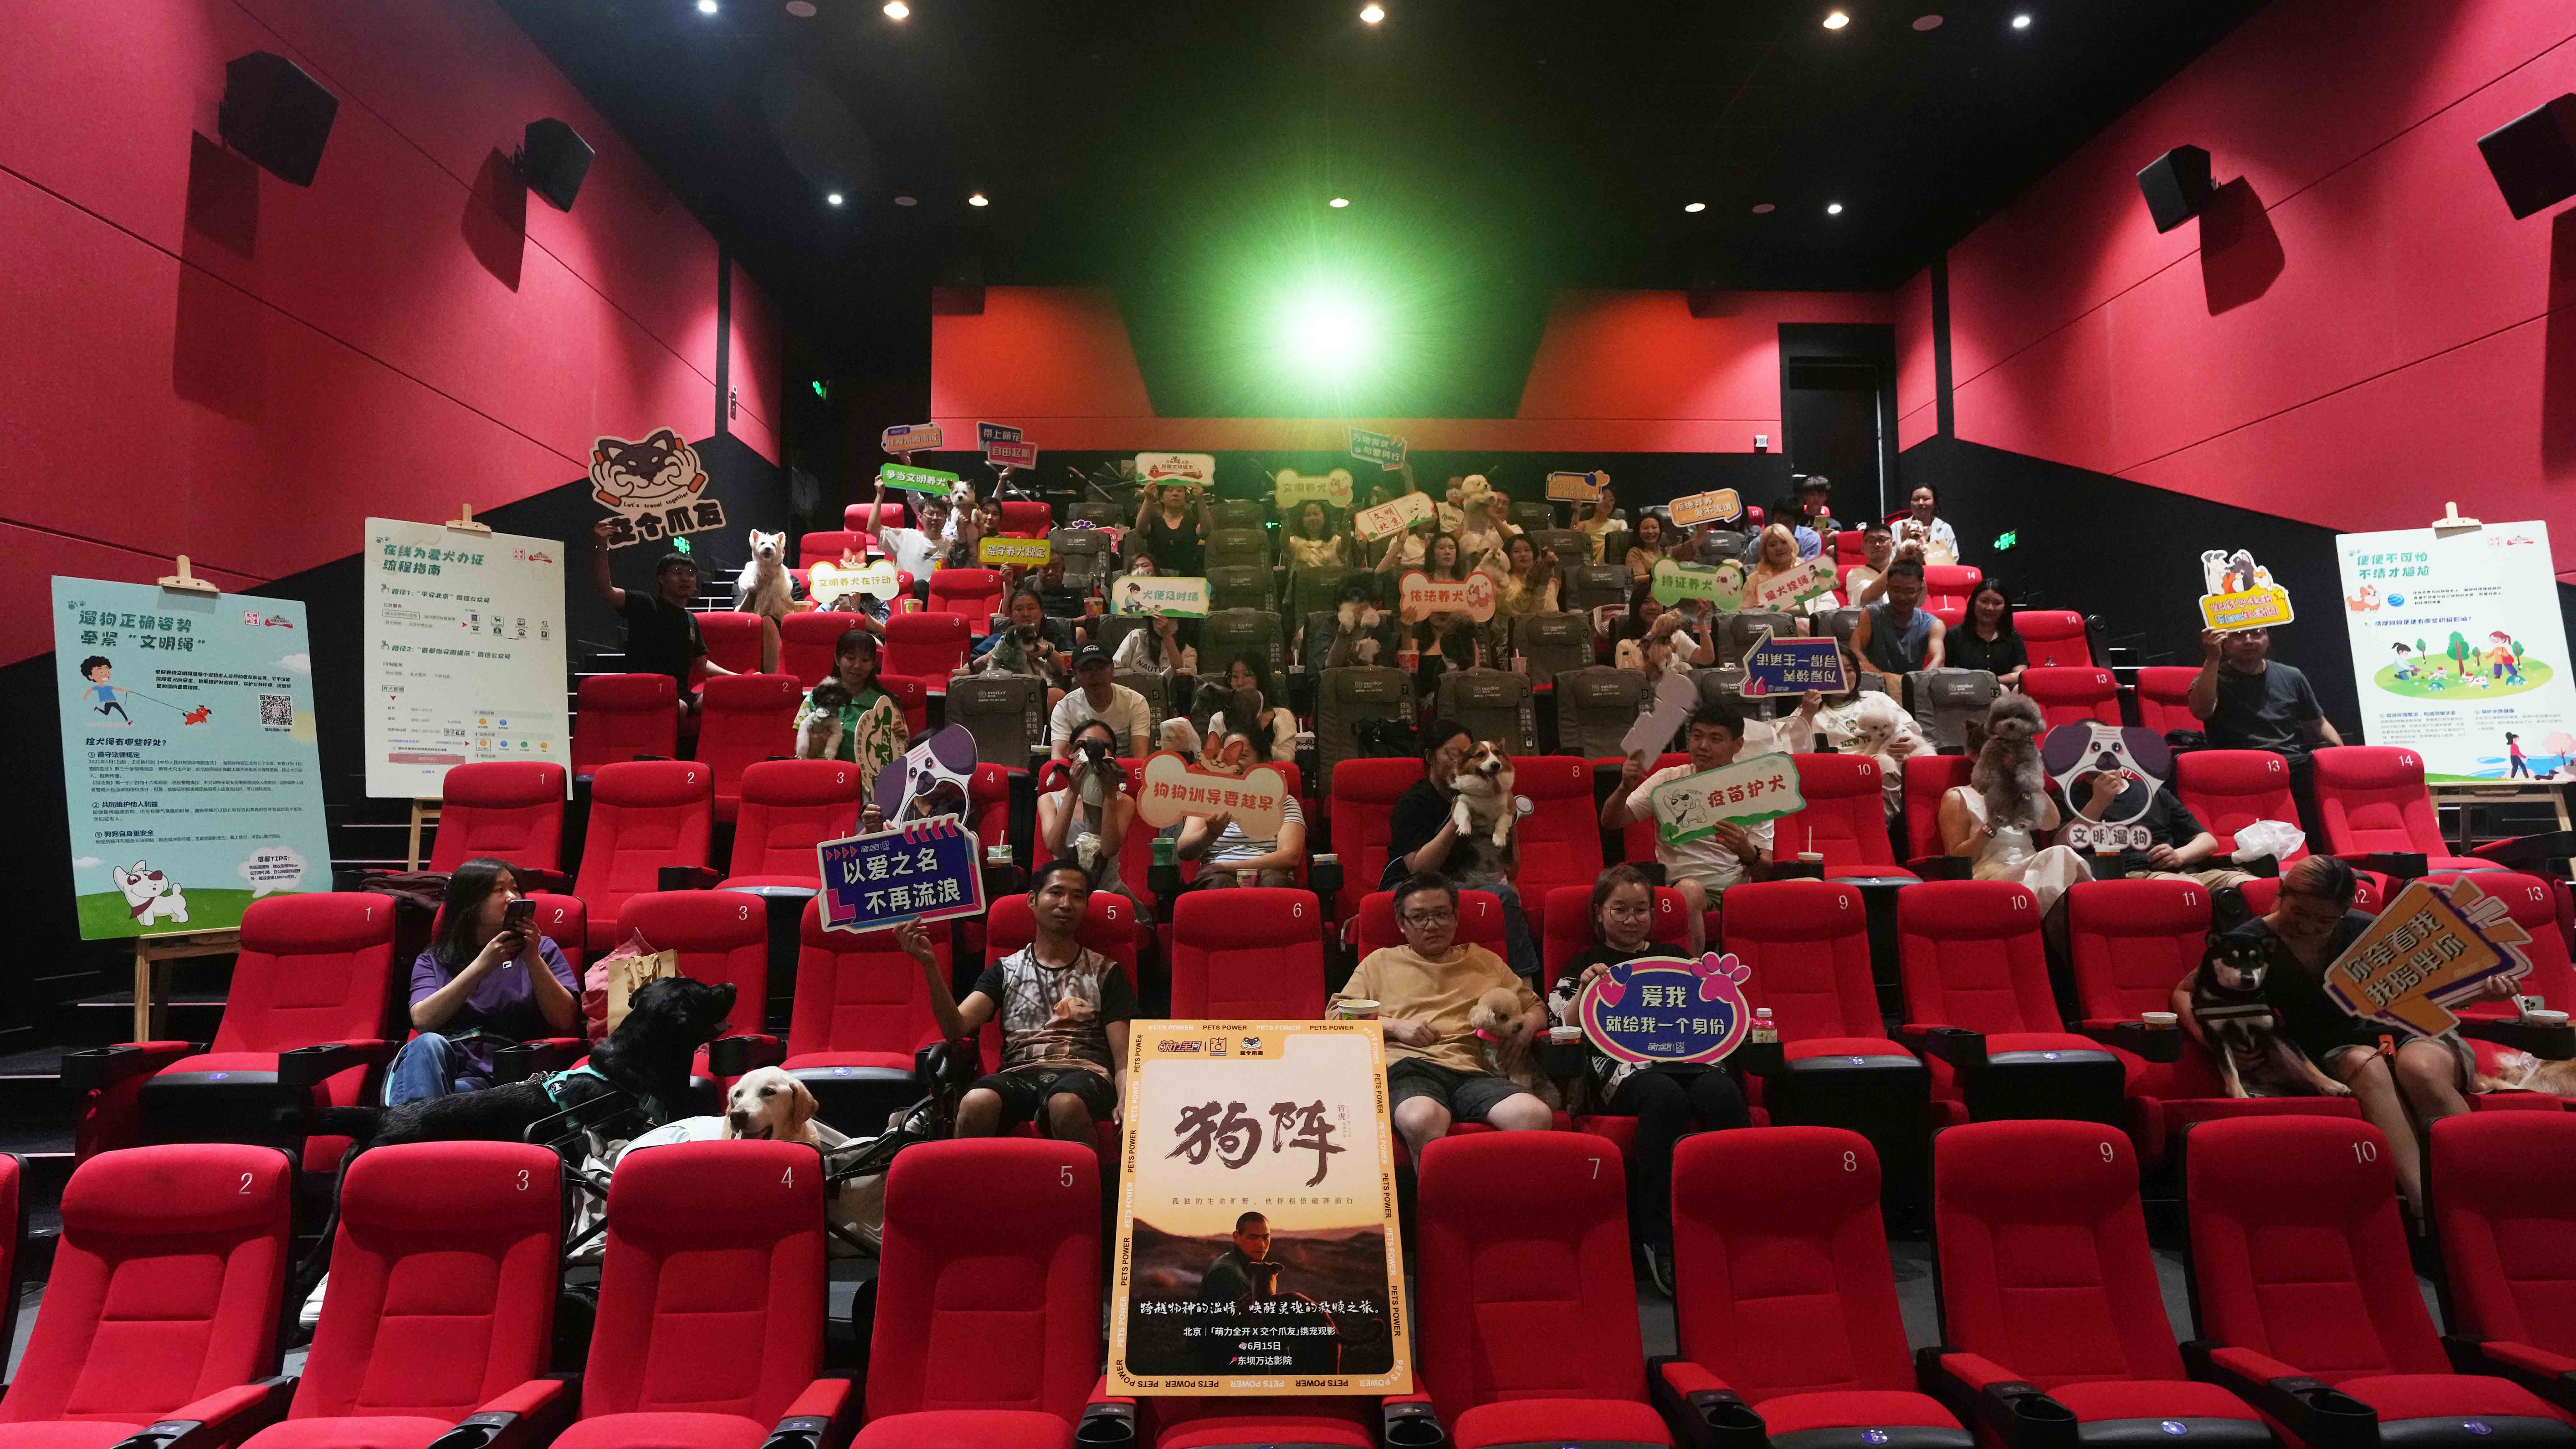 Dogs accompany owners to movie screening in Beijing